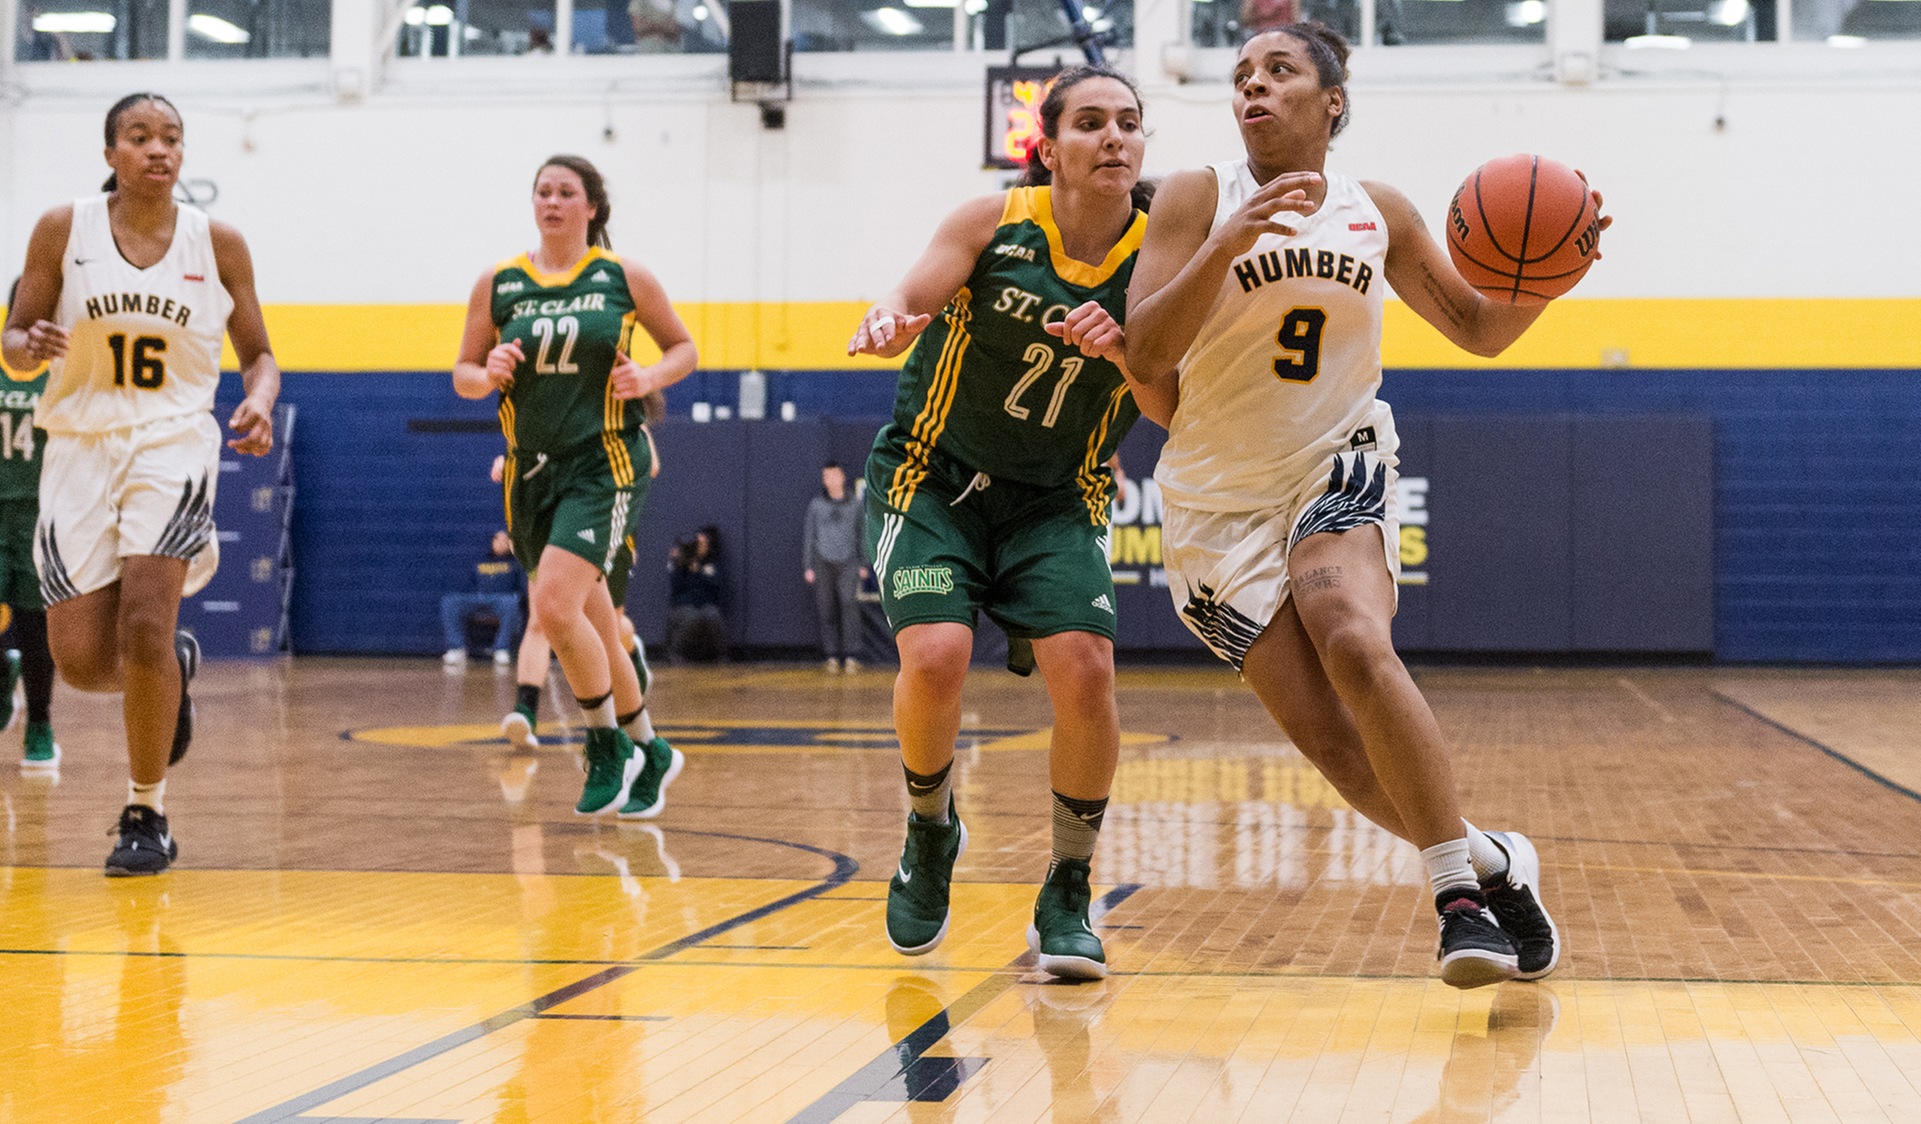 No. 11 WOMEN'S BASKETBALL HOLDS OFF ST. CLAIR, 89-83